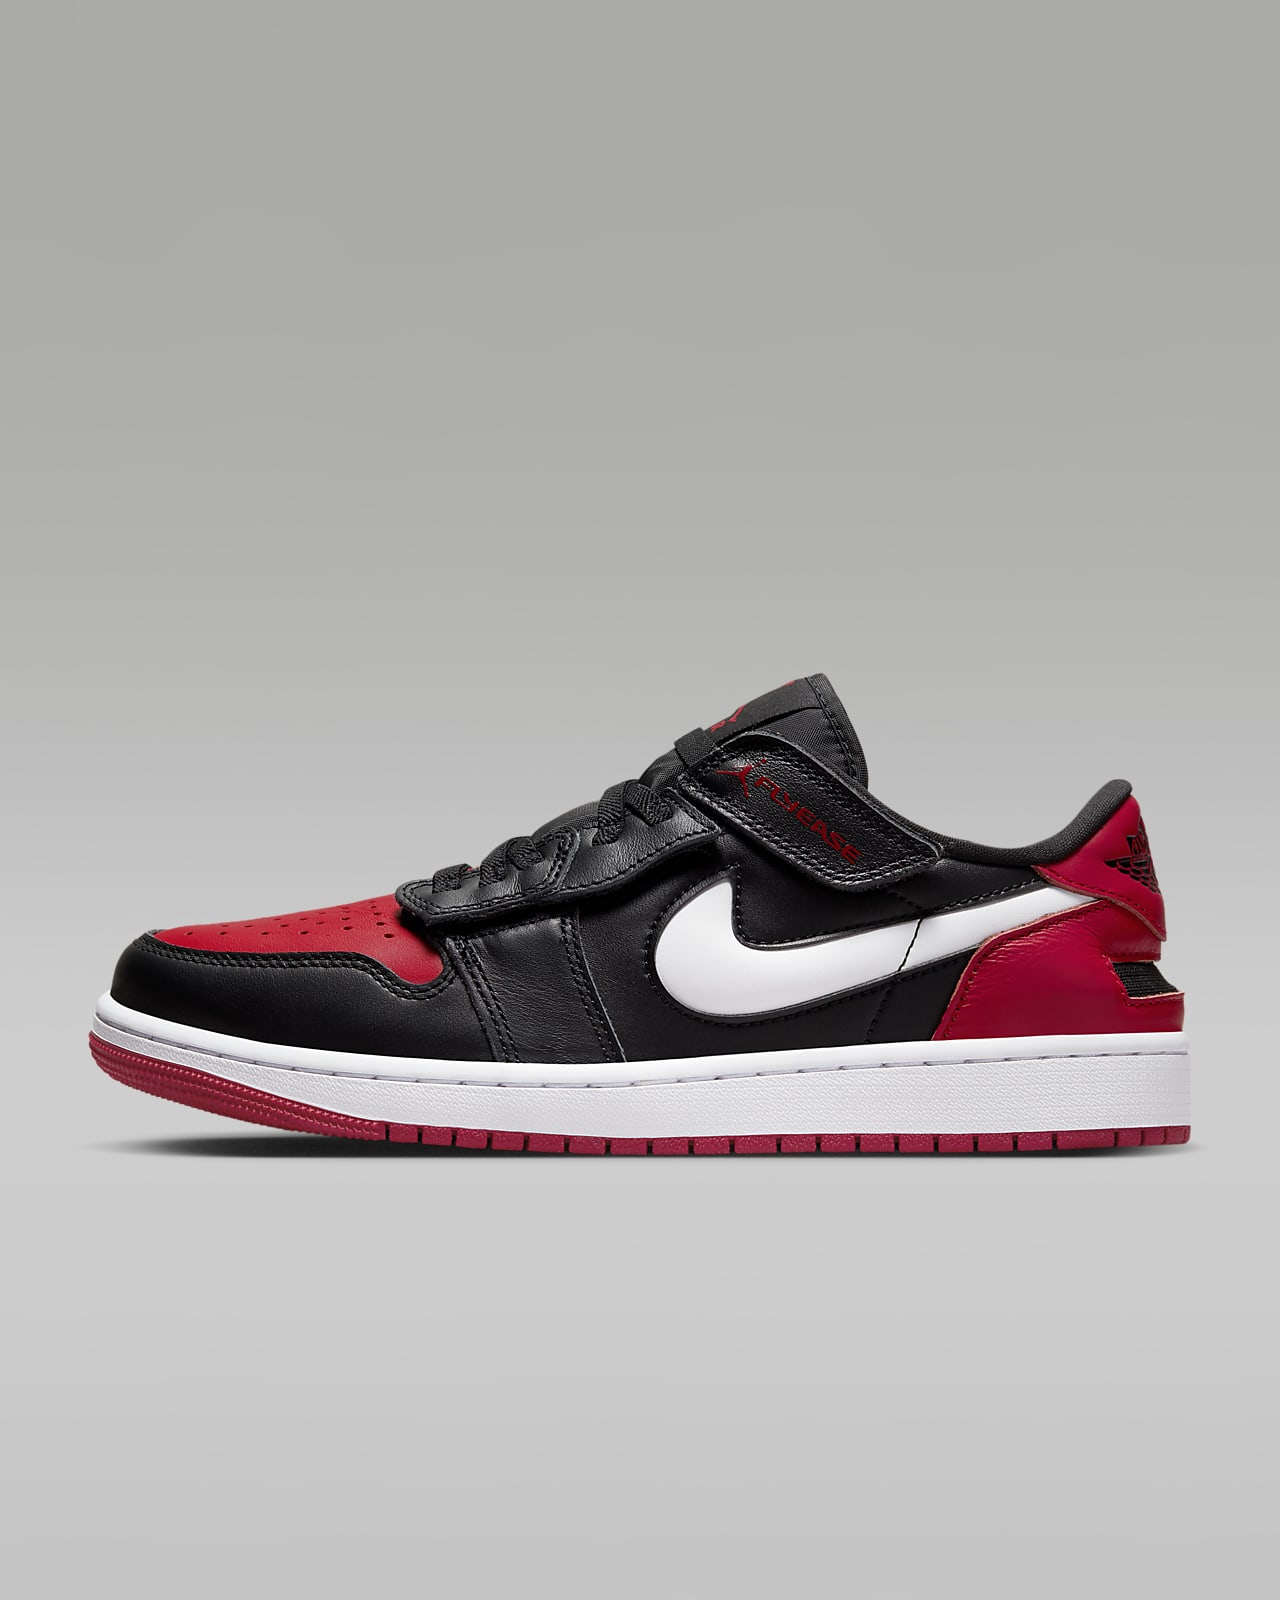 Step Into Comfort Heaven: Unveiling the Air Jordan 1 Low FlyEase - The Game-Changing Mens Easy On/Off Shoes!